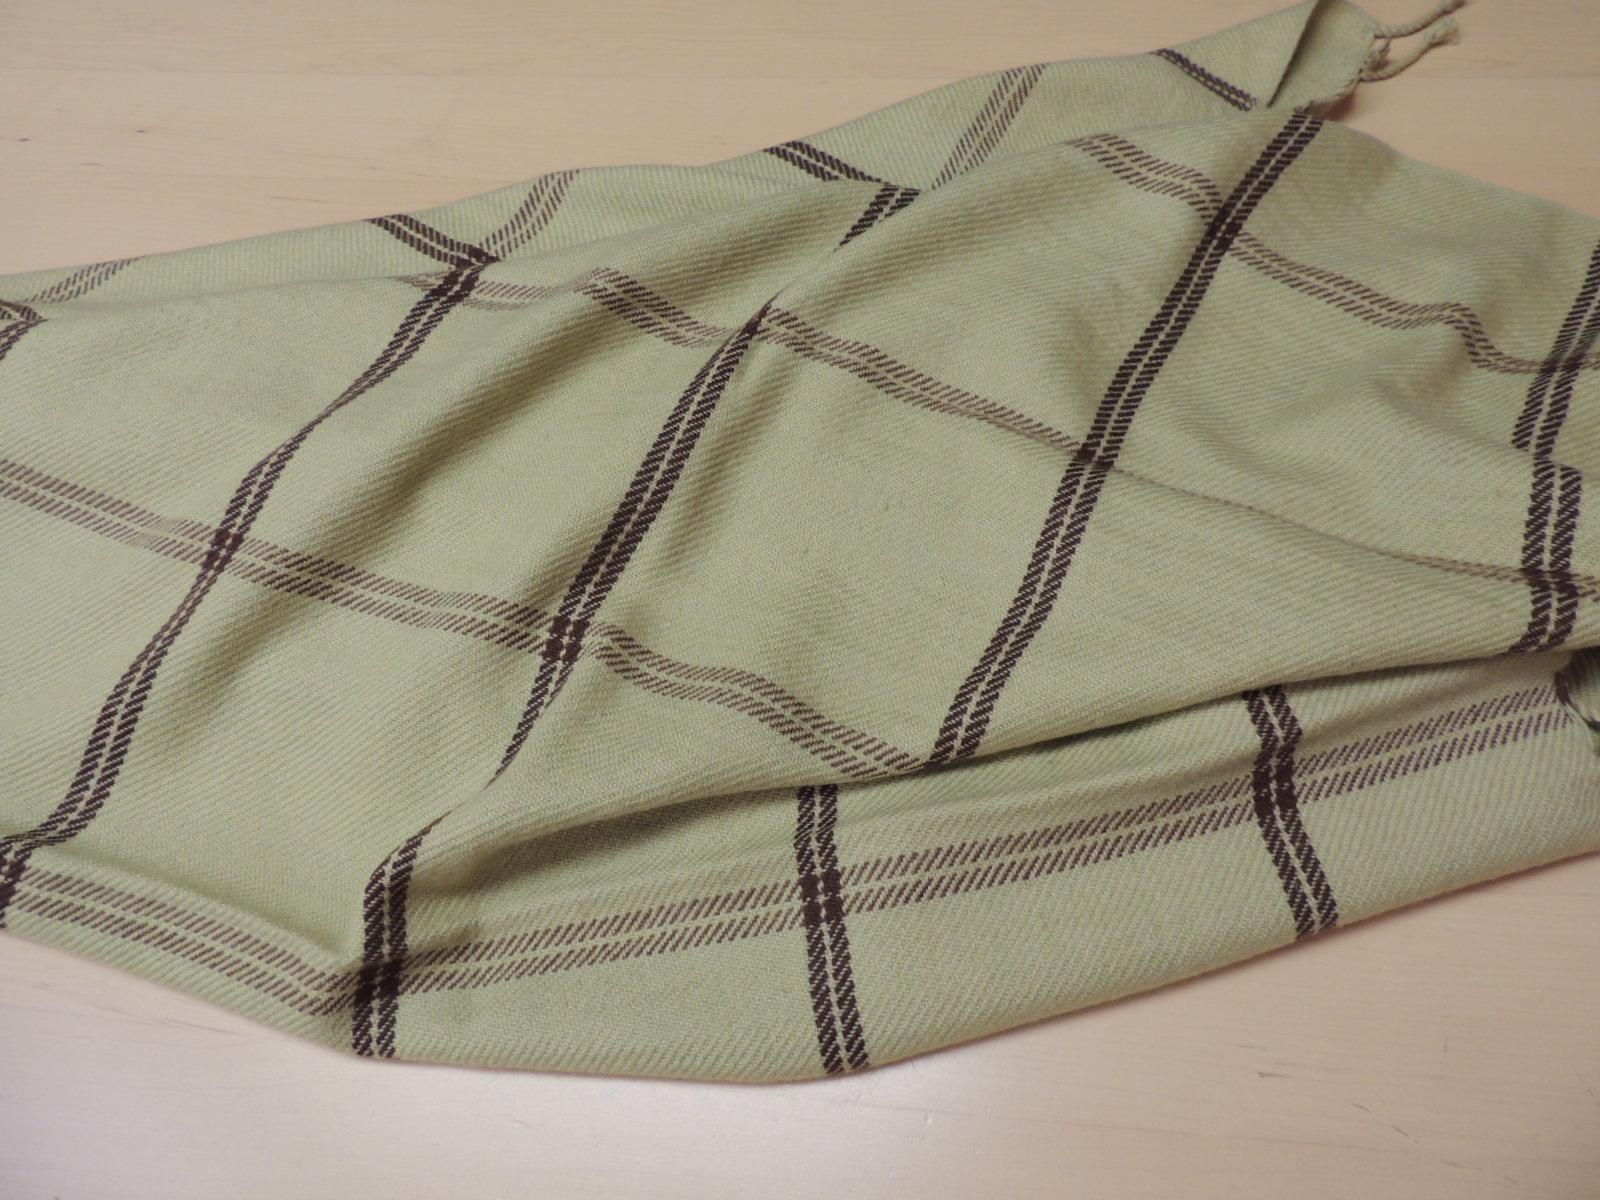 Woven Green and Brown Himalayan Cashmere Throw with Hand Knotted Fringes 2